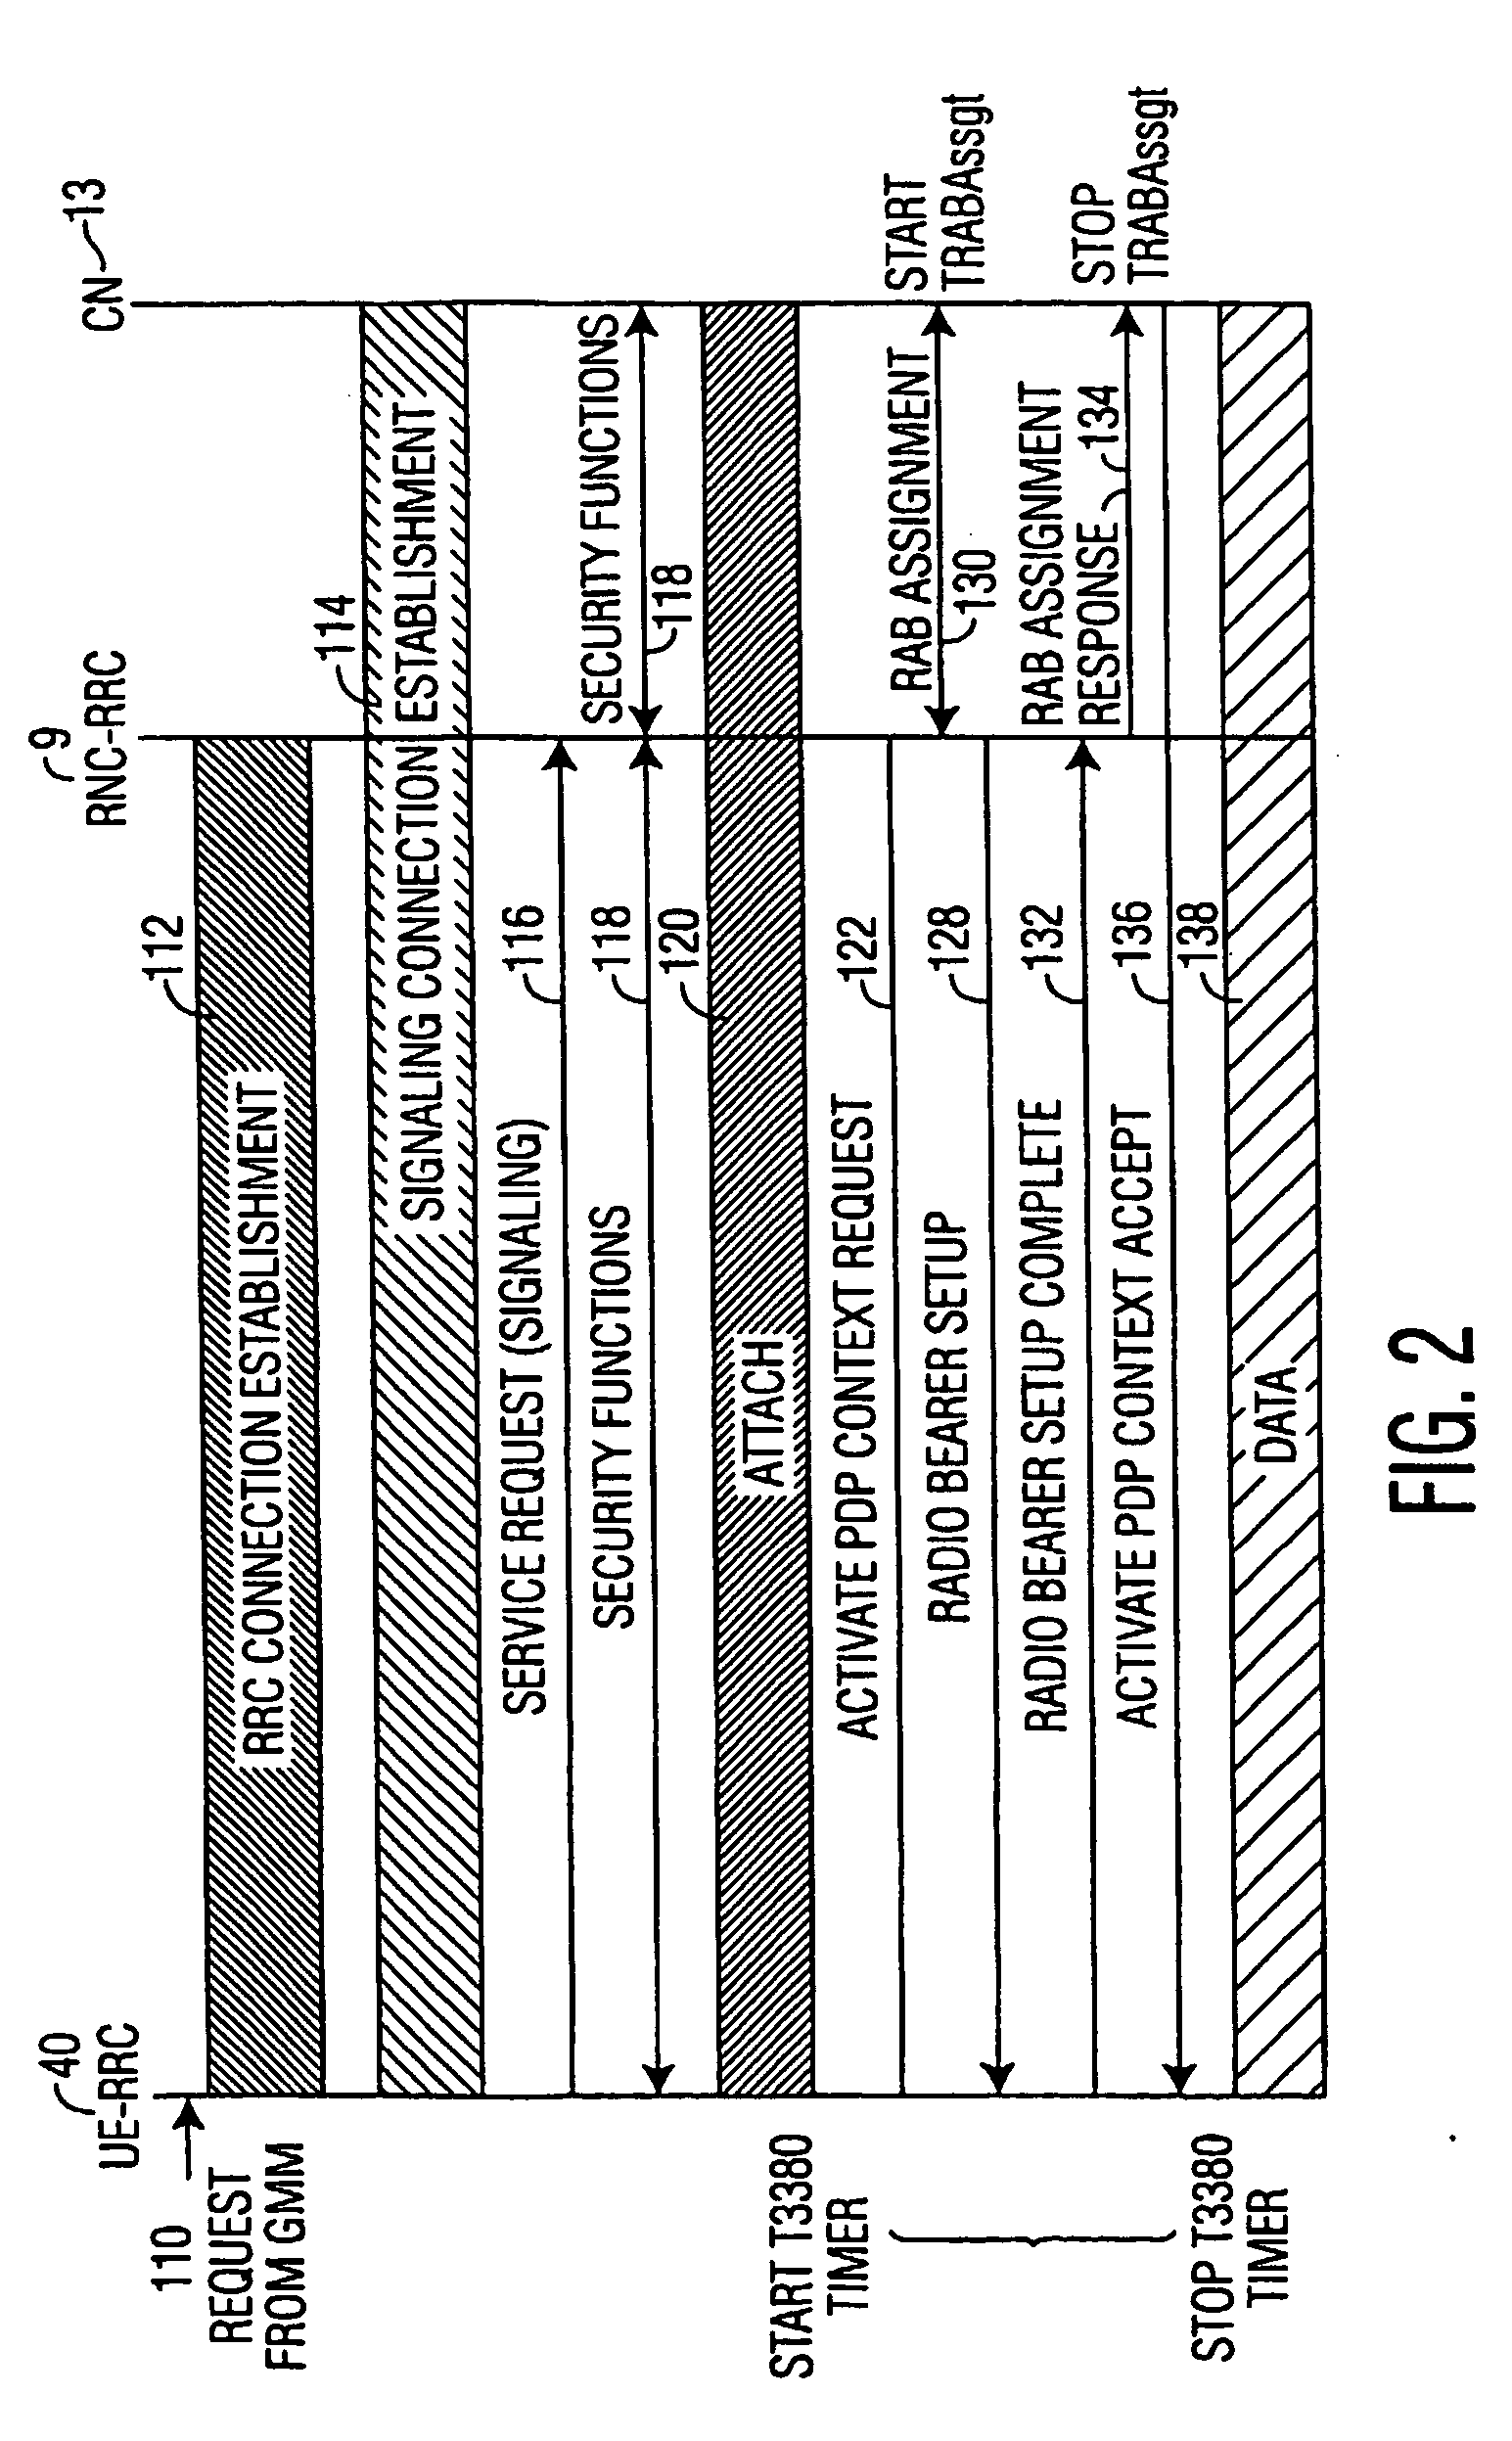 Registration of a wlan as a umts routing area for wlan-umts interworking